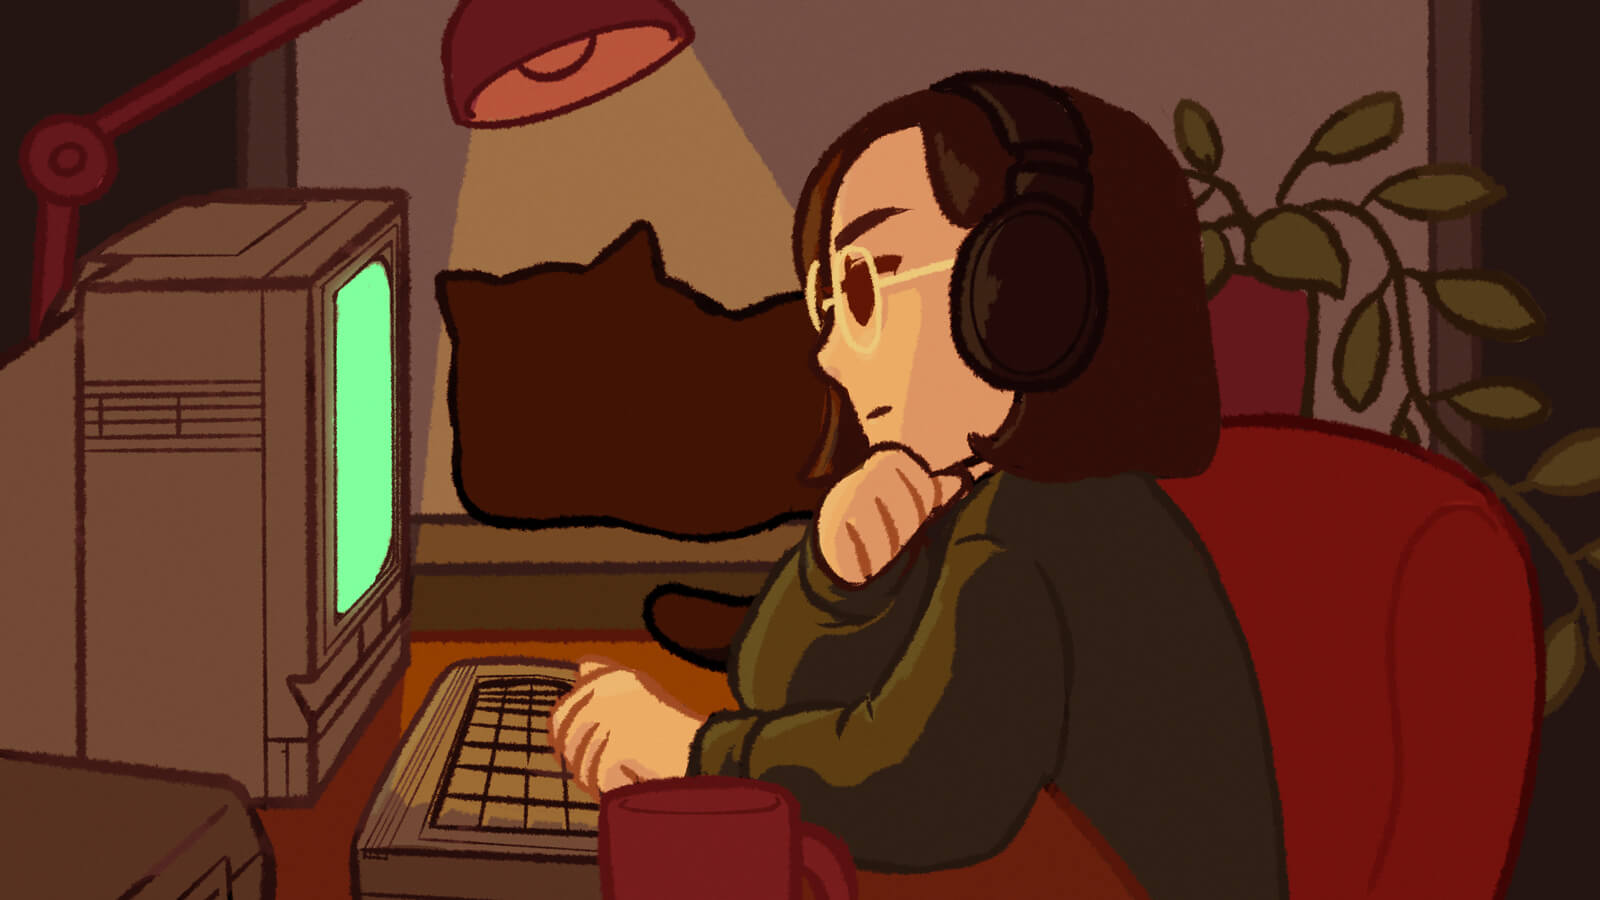 Digital illustration of myself drawn in the 'lofi beats girl' style. I'm sitting at my desk using a vintage computer and listening to music. A cat sits on the window sill next to me.